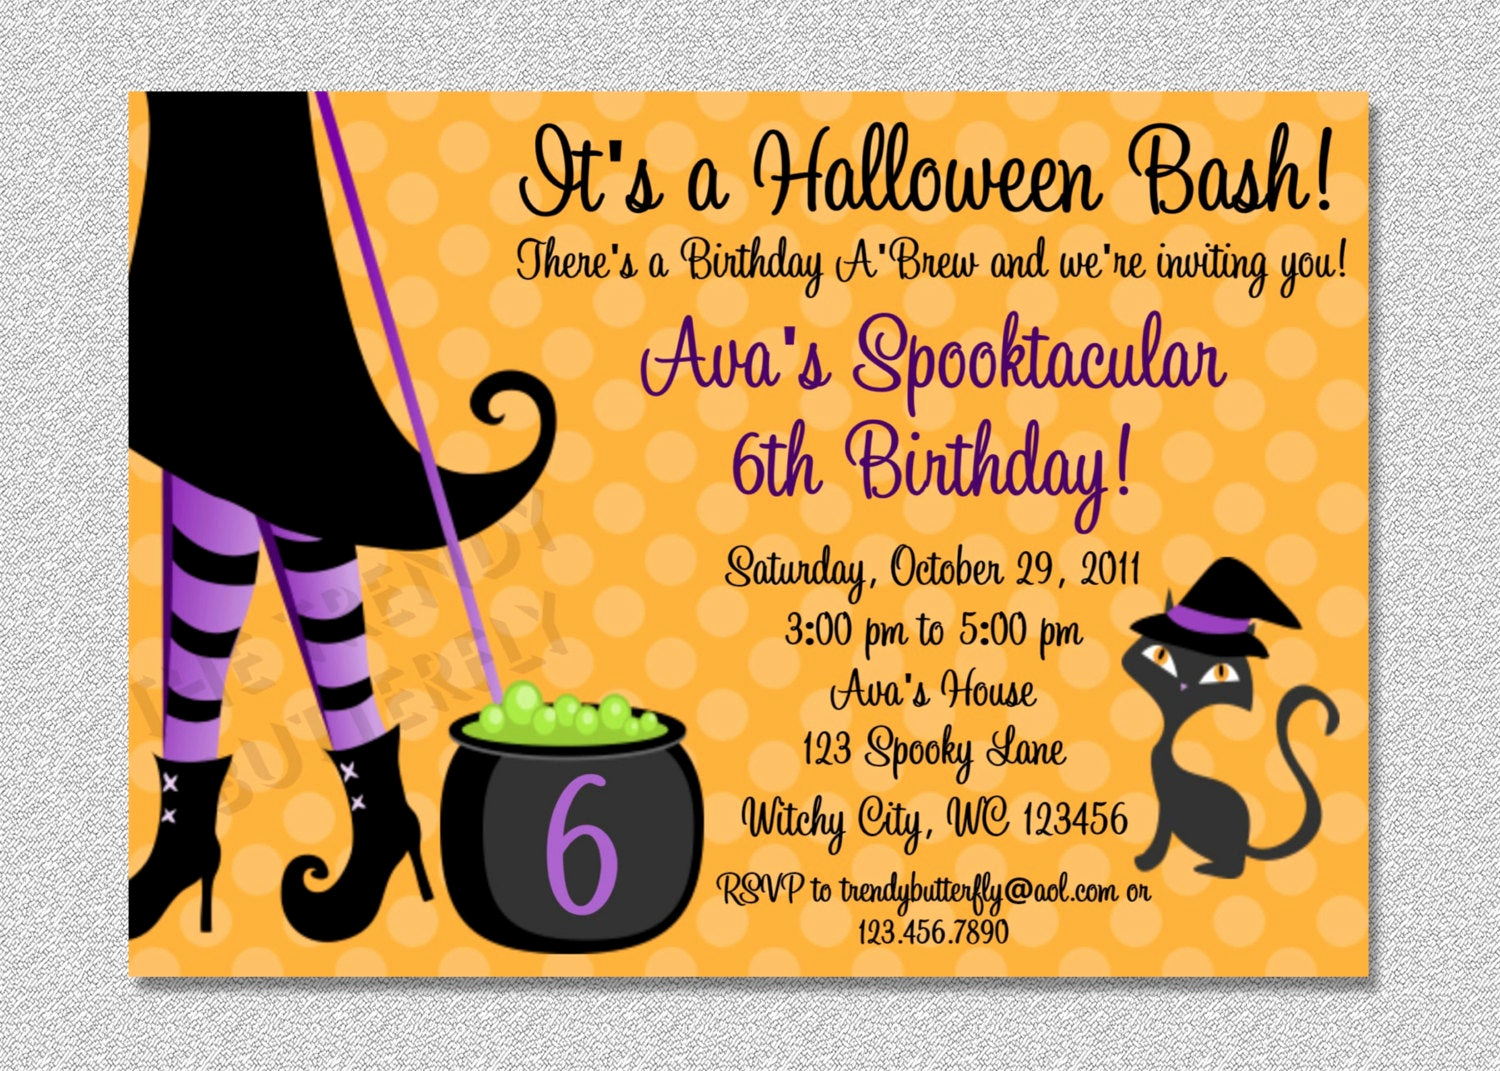 Halloween Birthday Party Invitations Awesome Halloween Witch Costume Party Birthday Invitation